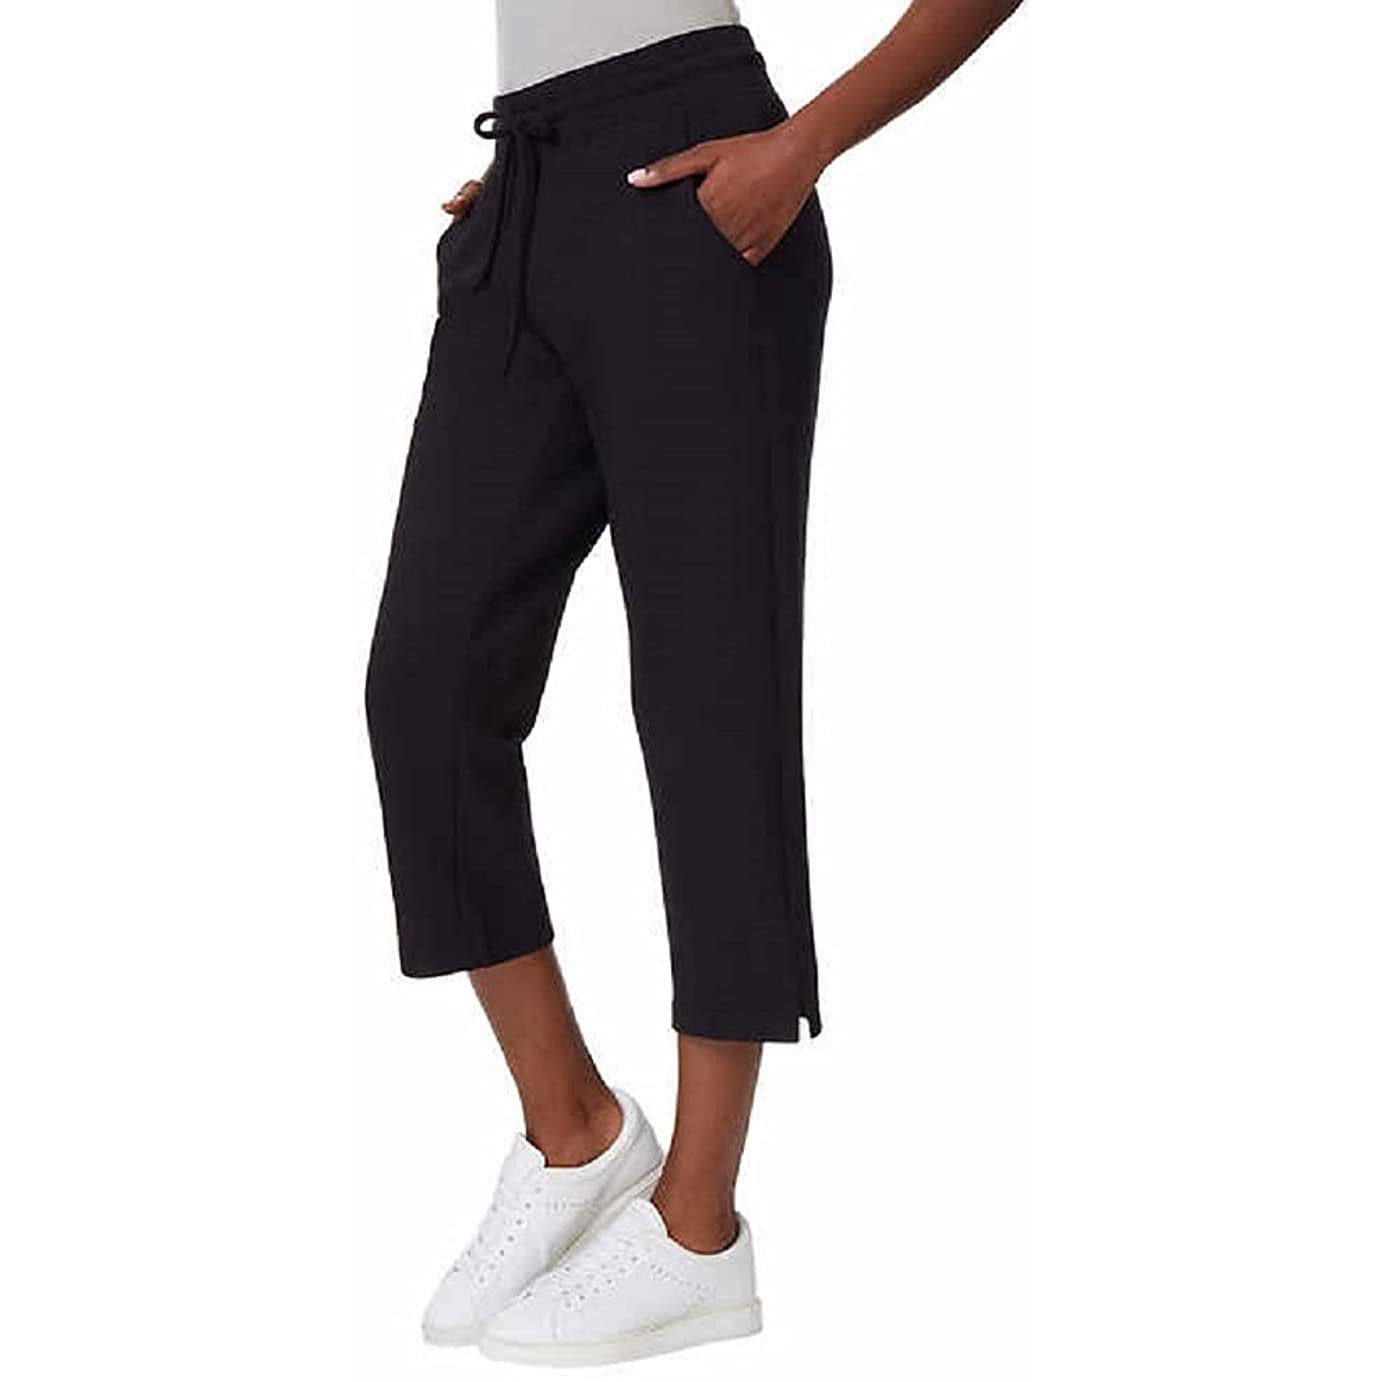 32 Degrees Cool Capri Pants: Moisture-Wicking, UPF 50+ Protection, 4-Way Stretch